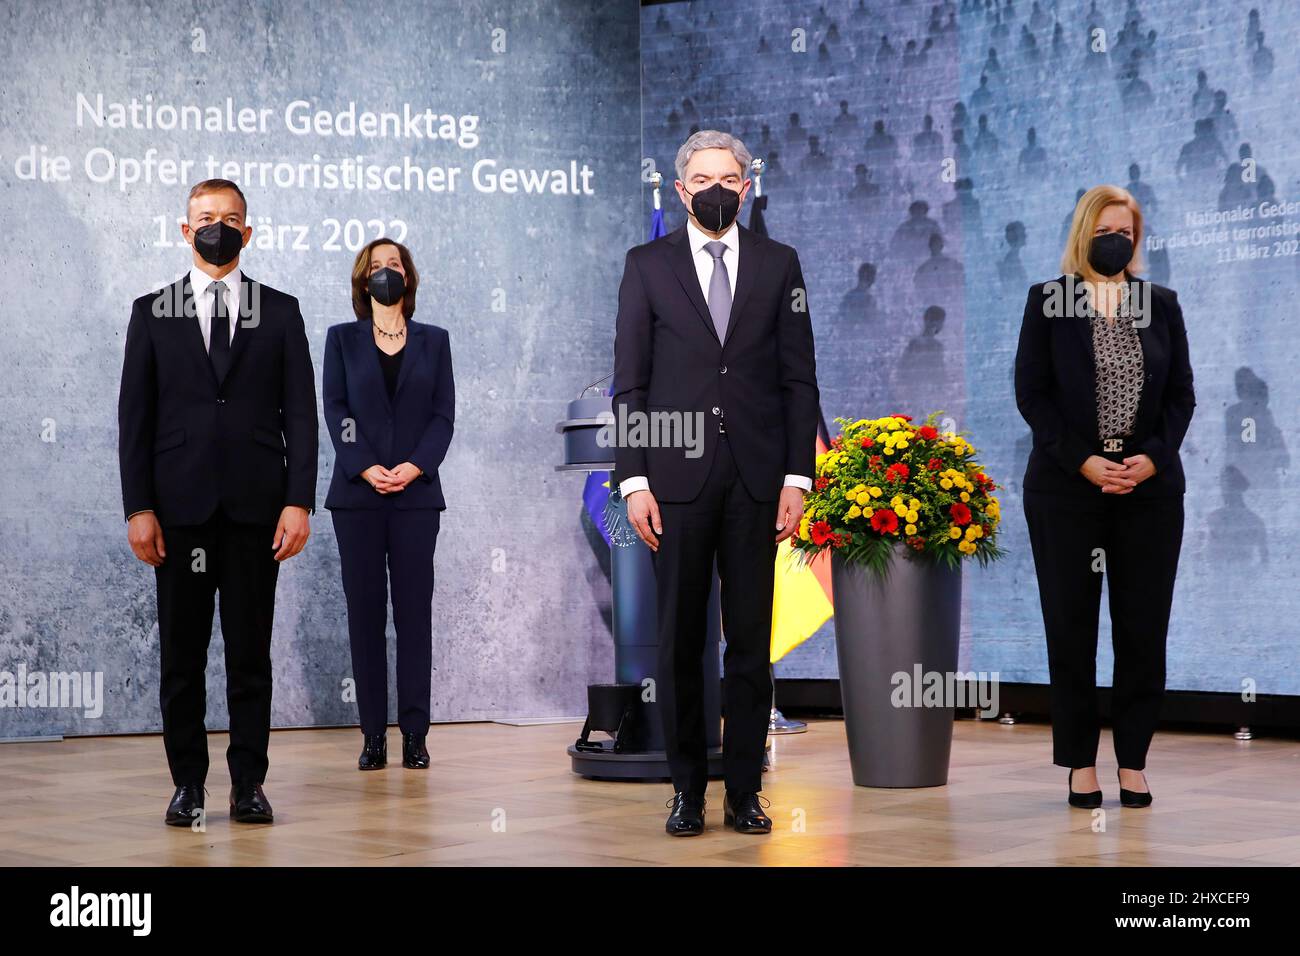 11 March 2022, Berlin: Pascal Kober (l-r), Federal Government Commissioner for the Concerns of Victims of Terrorist and Extremist Attacks in Germany, Petra Terhoeven, historian, Stephan Harbarth, President of the Federal Constitutional Court, and Nancy Faeser (SPD), Federal Minister of the Interior and Home Affairs, stand during the minute's silence at the German government's commemoration of the victims of terrorist violence. The Day of Remembrance, which is to be held annually on March 11, ties in at the national level with the European Day of Remembrance, which was established afte Stock Photo